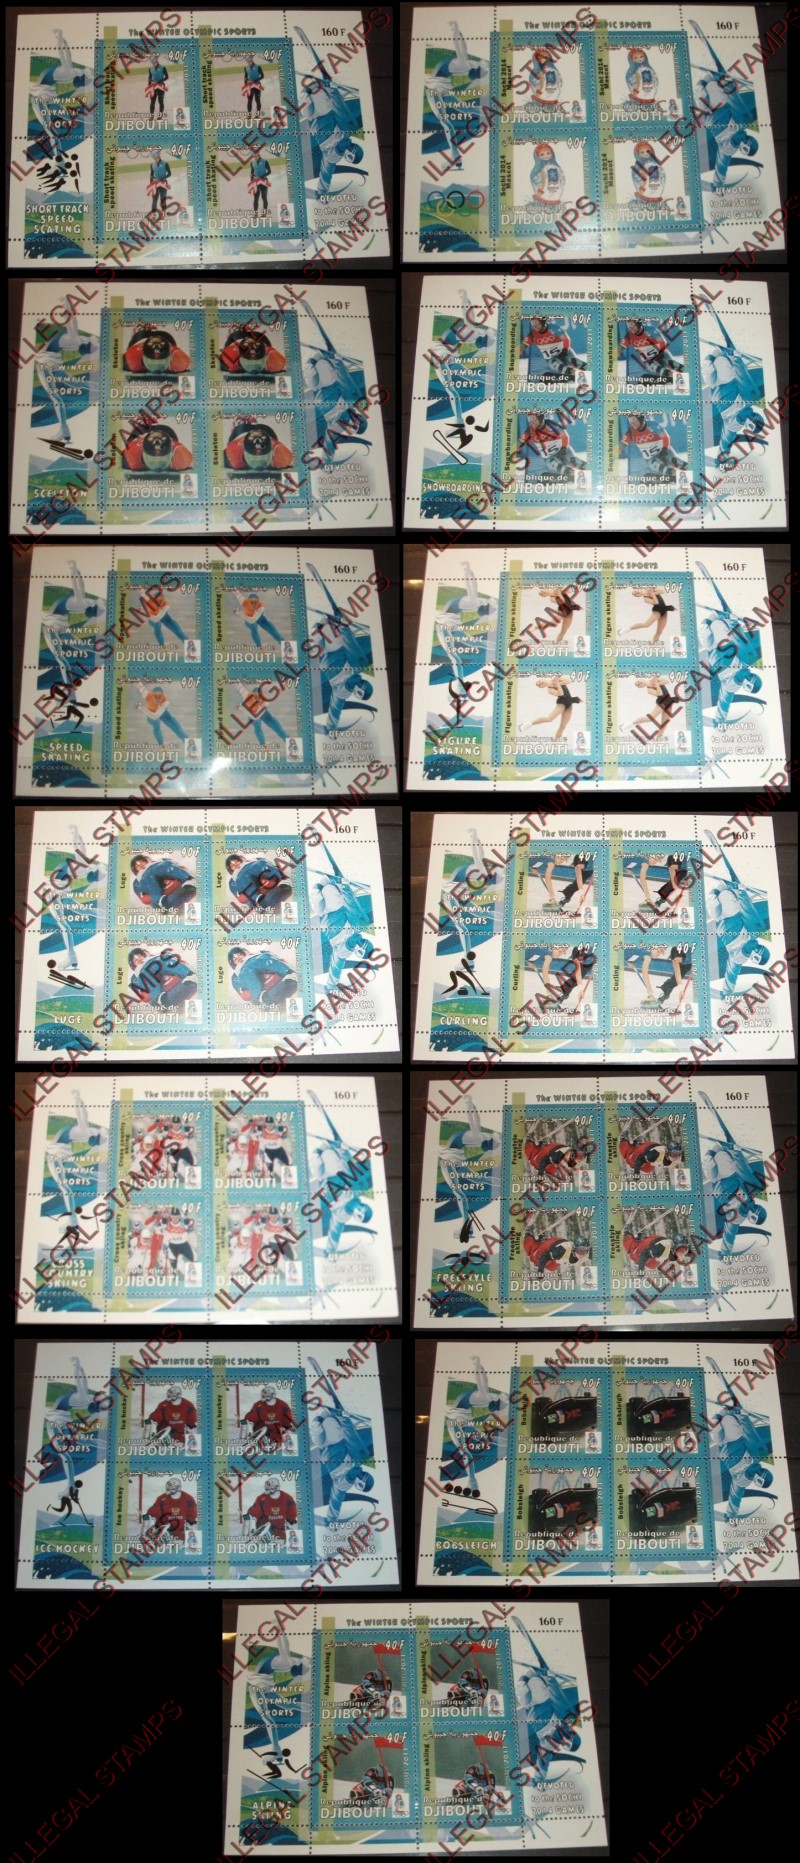 Djibouti 2011 Winter Olympic Games Illegal Stamp Souvenir Sheets of 4